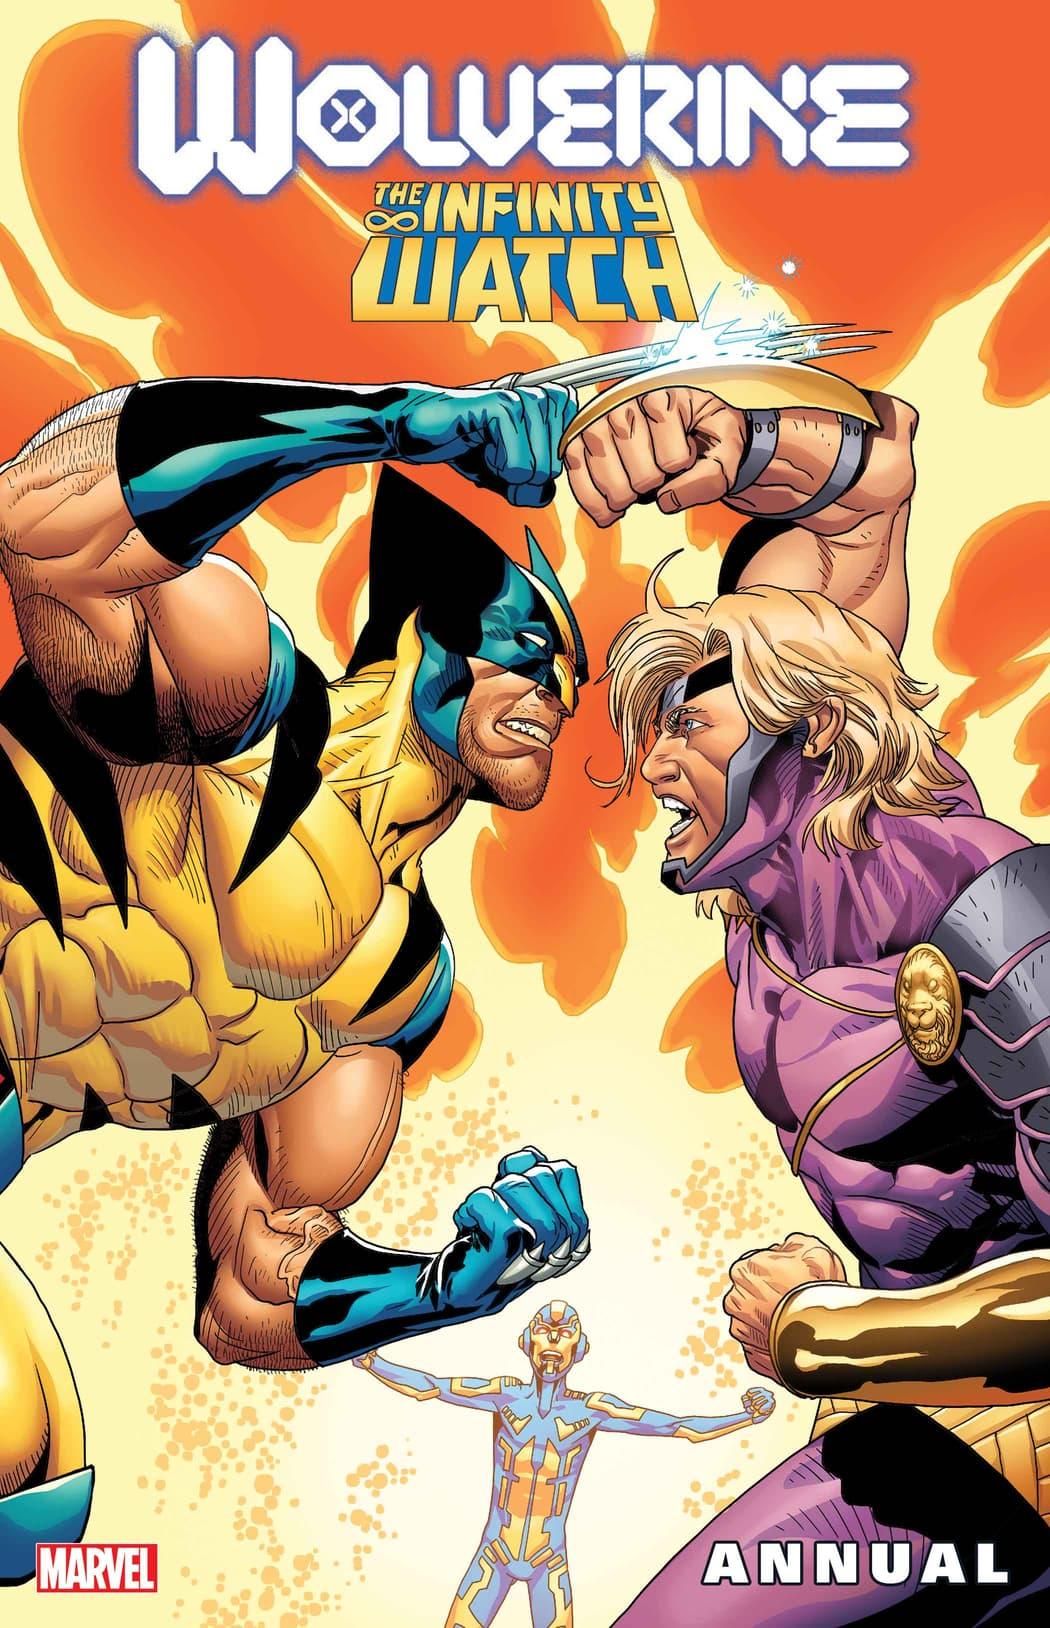 Infinity Watch Wolverine Annual #1 cover art